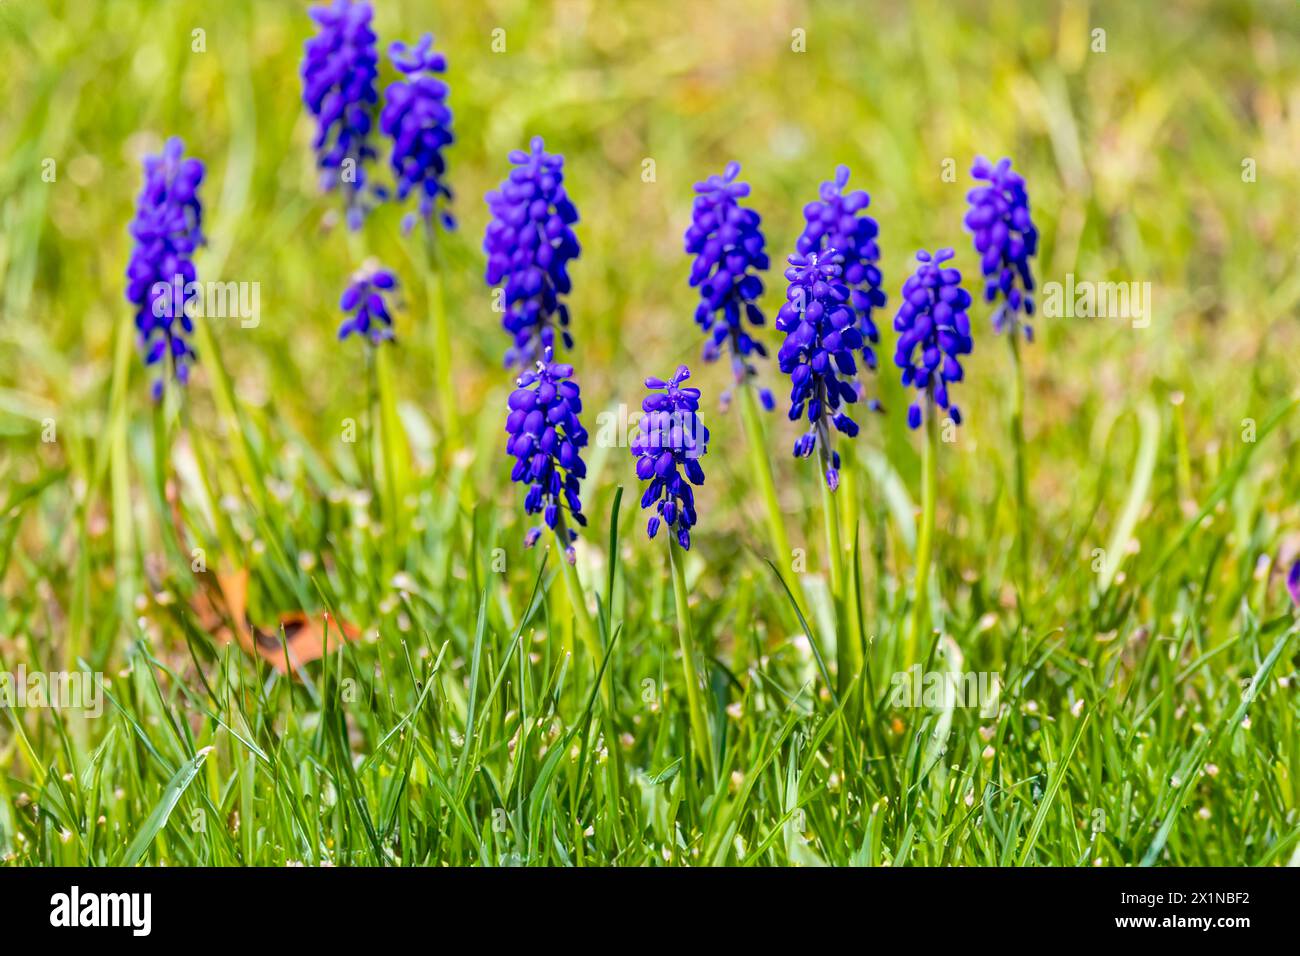 Muscari .The common name for the genus is grape hyacinth,  used as ornamental garden plants. Stock Photo